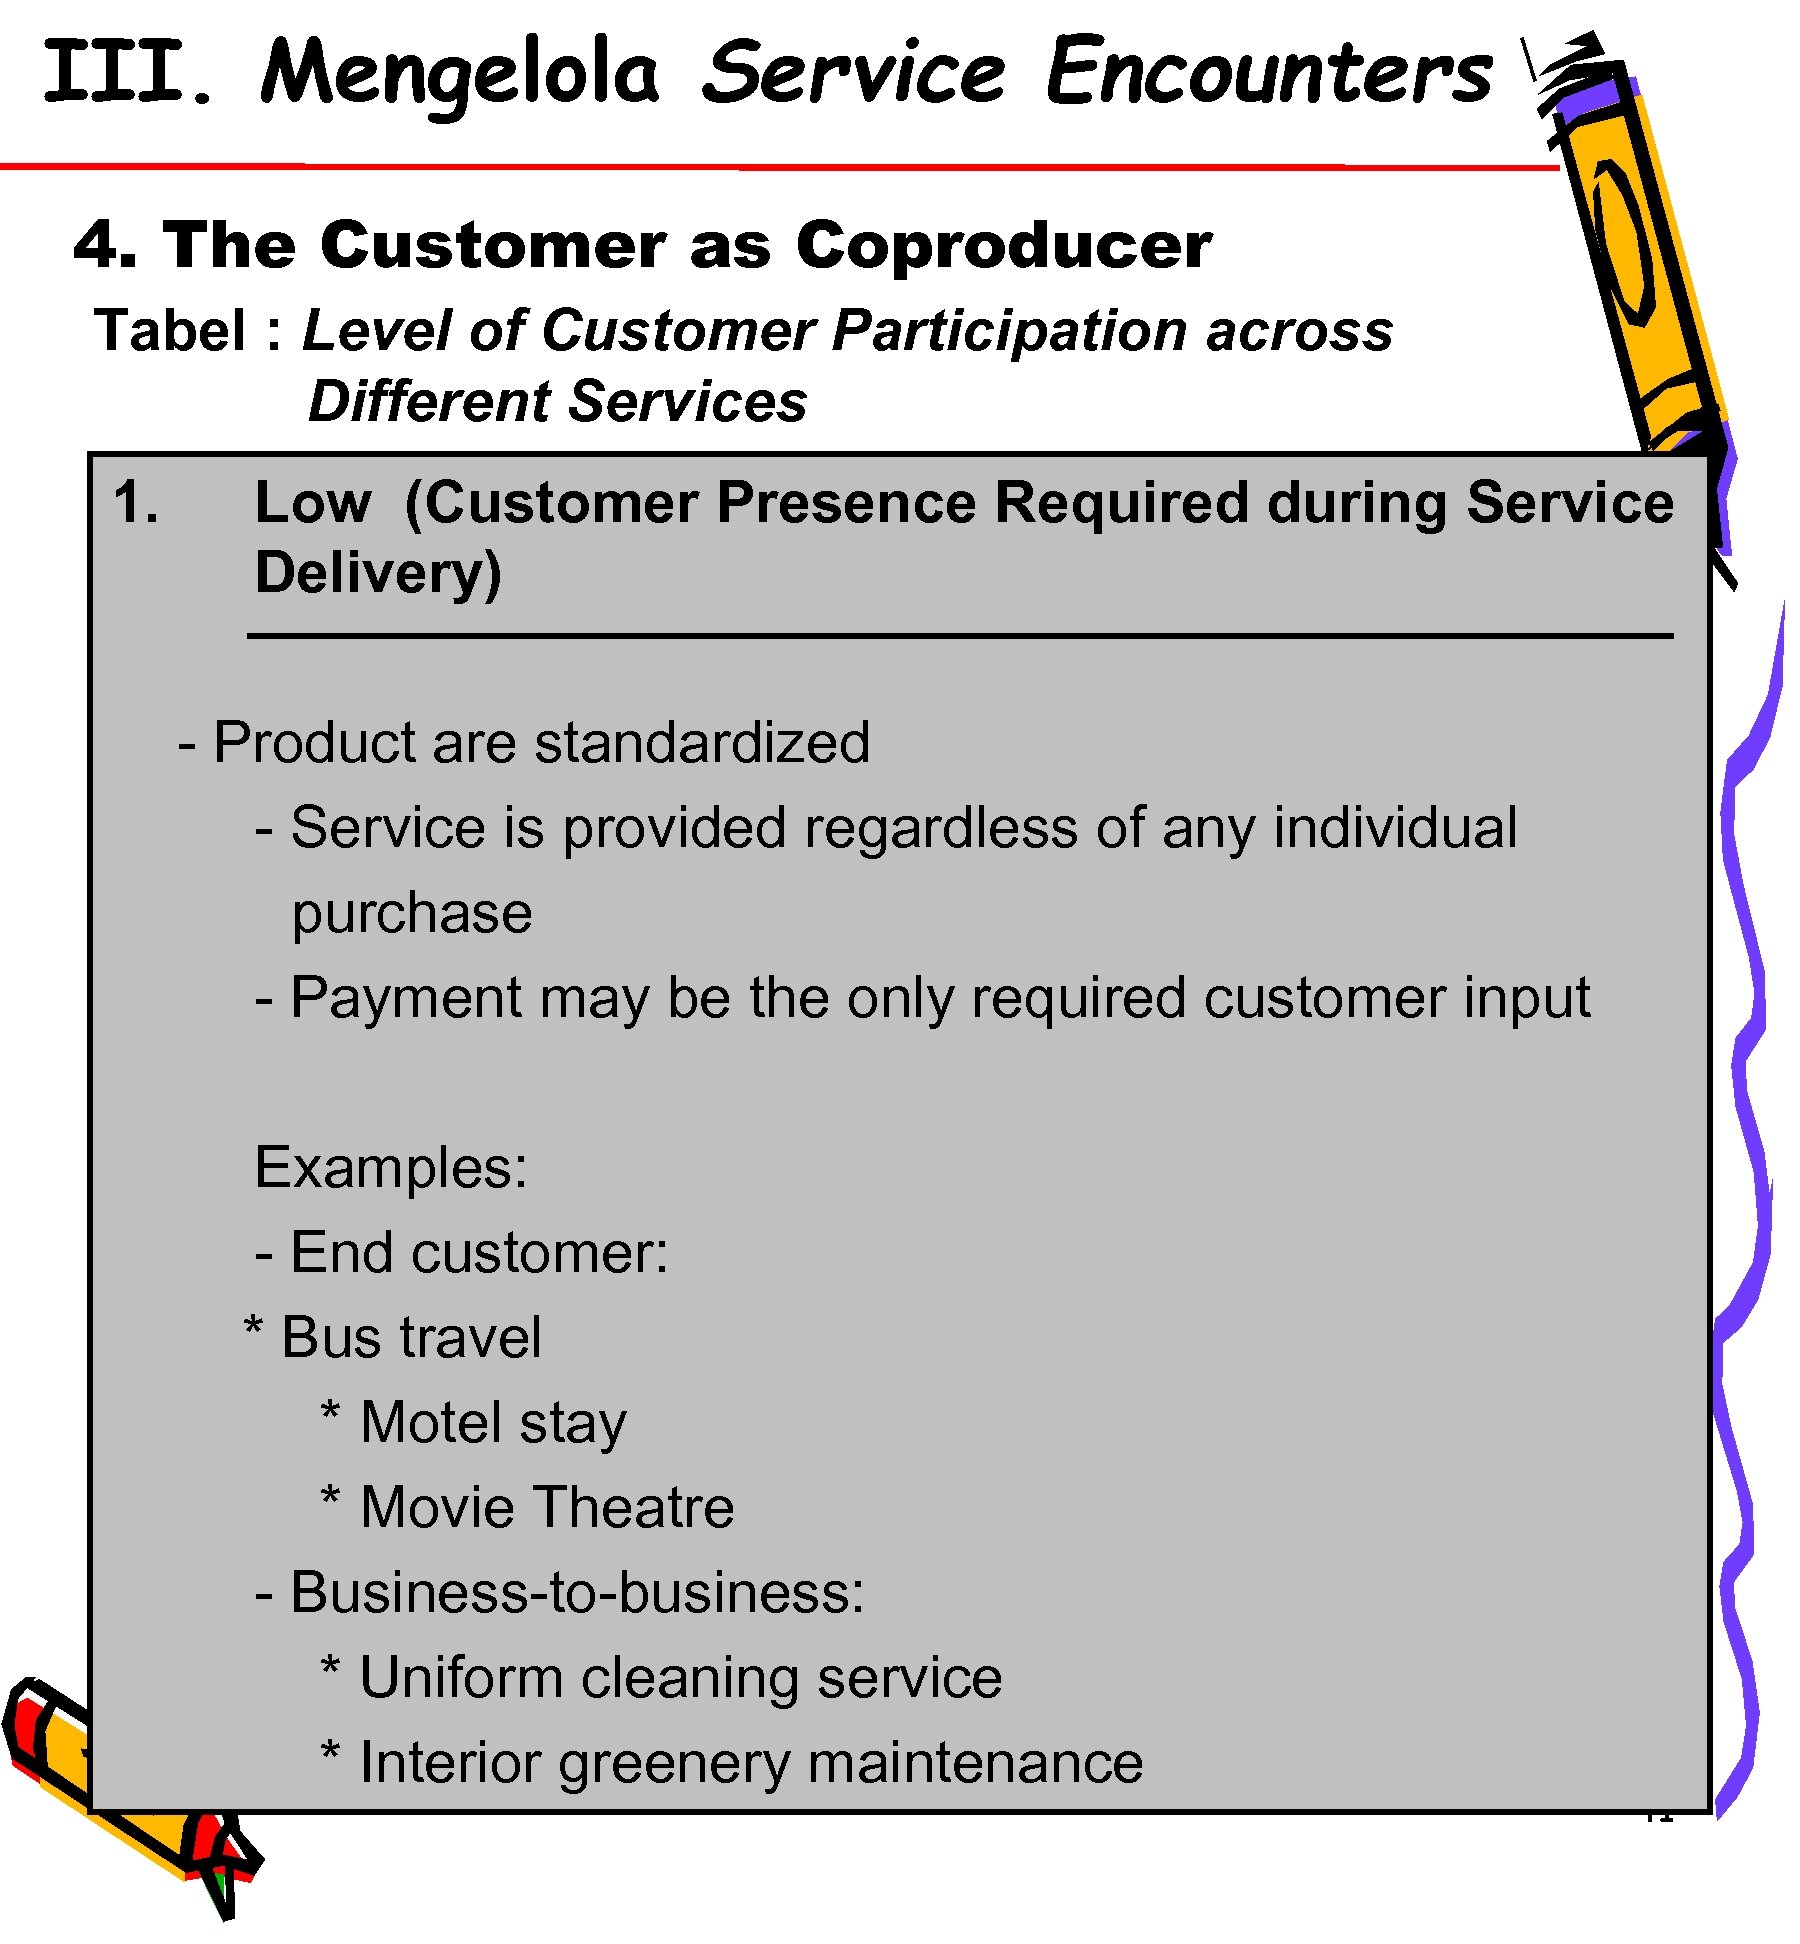 III. Mengelola Service Encounters 4. The Customer as Coproducer Tabel : Level of Customer